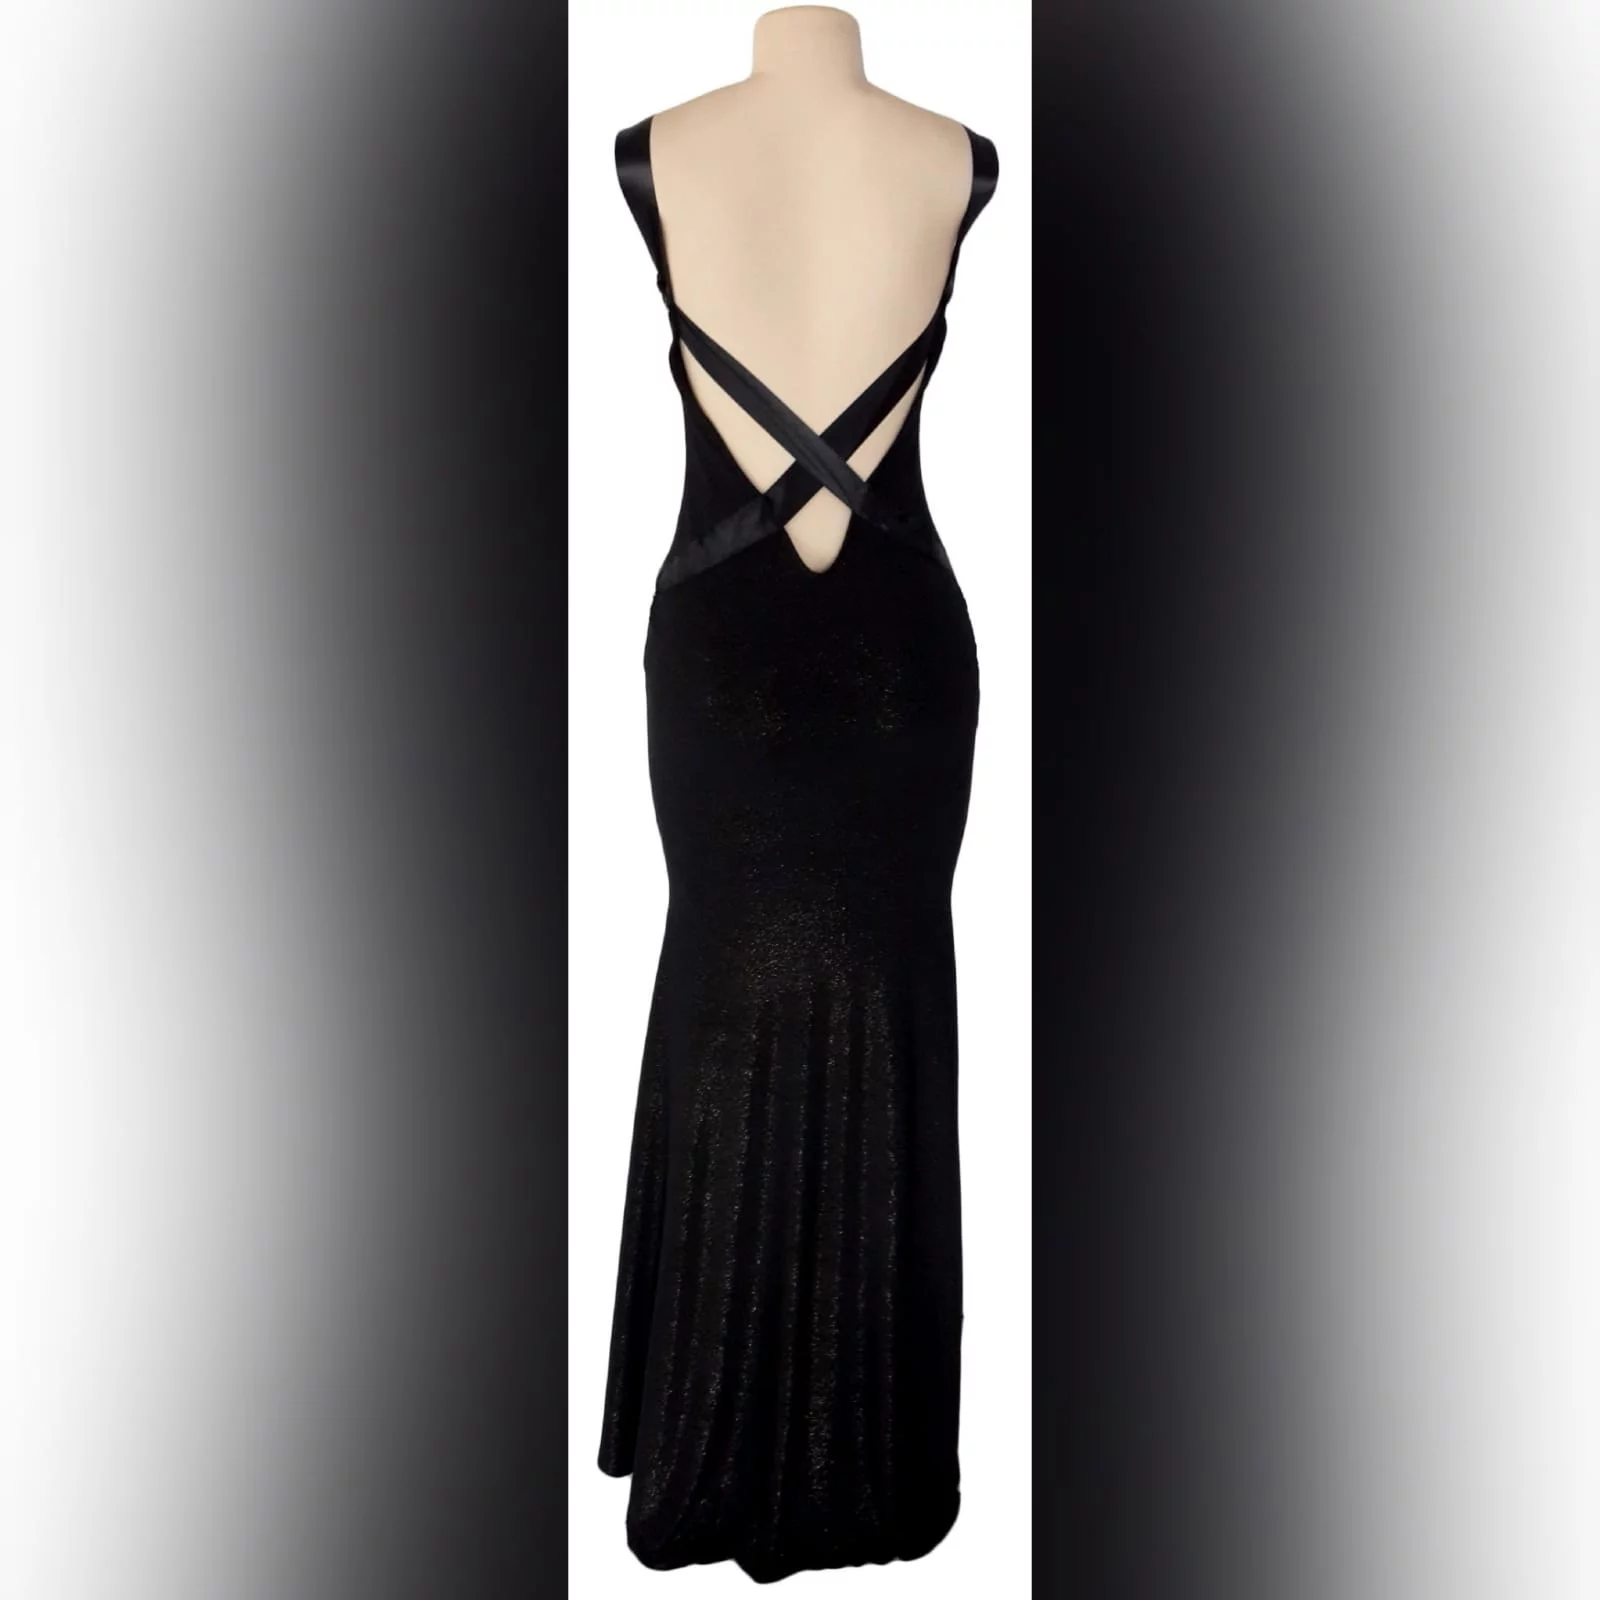 Black shimmer long gala evening dress 1 black shimmer long gala evening dress, with a low v open back. With ribbon creating a belt and a cross at the back